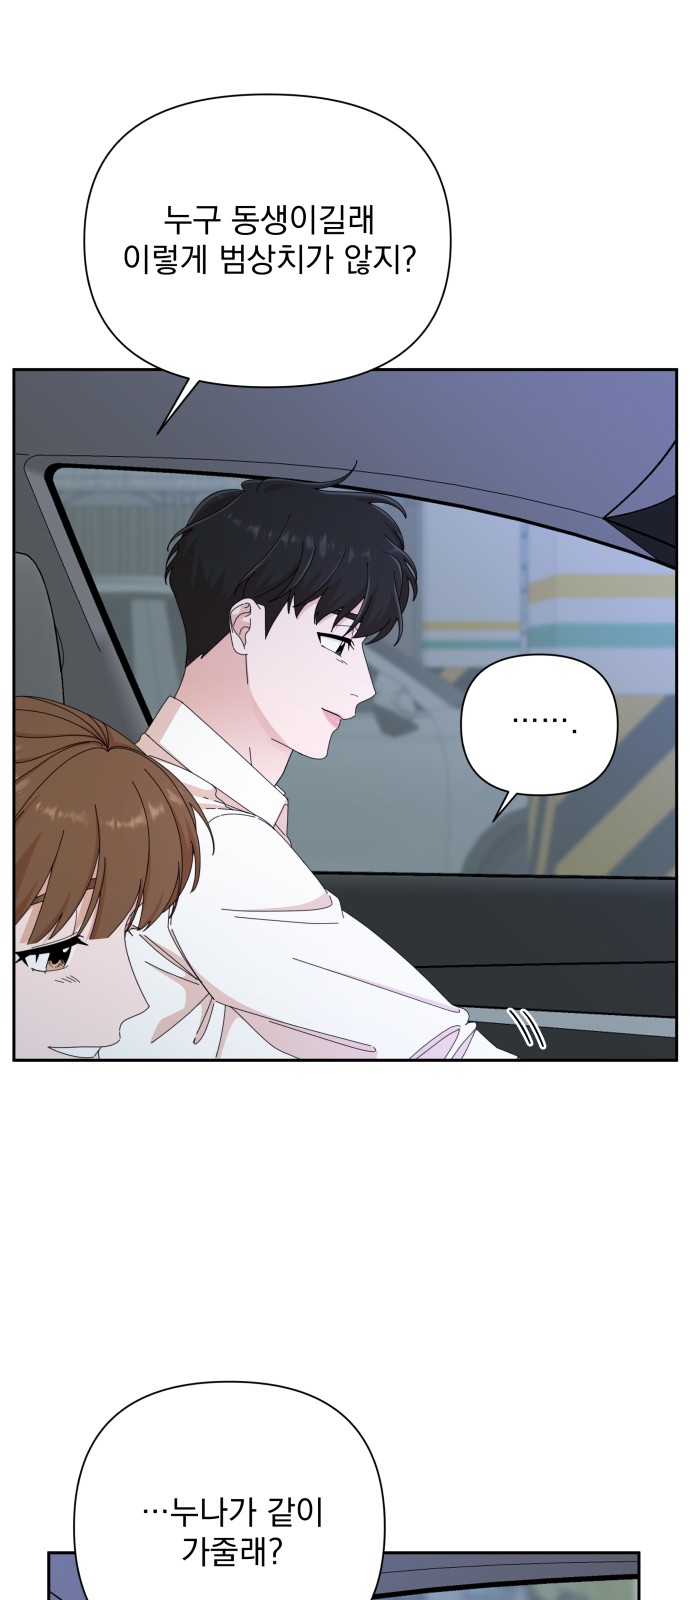 The Man With Pretty Lips - Chapter 34 - Page 4